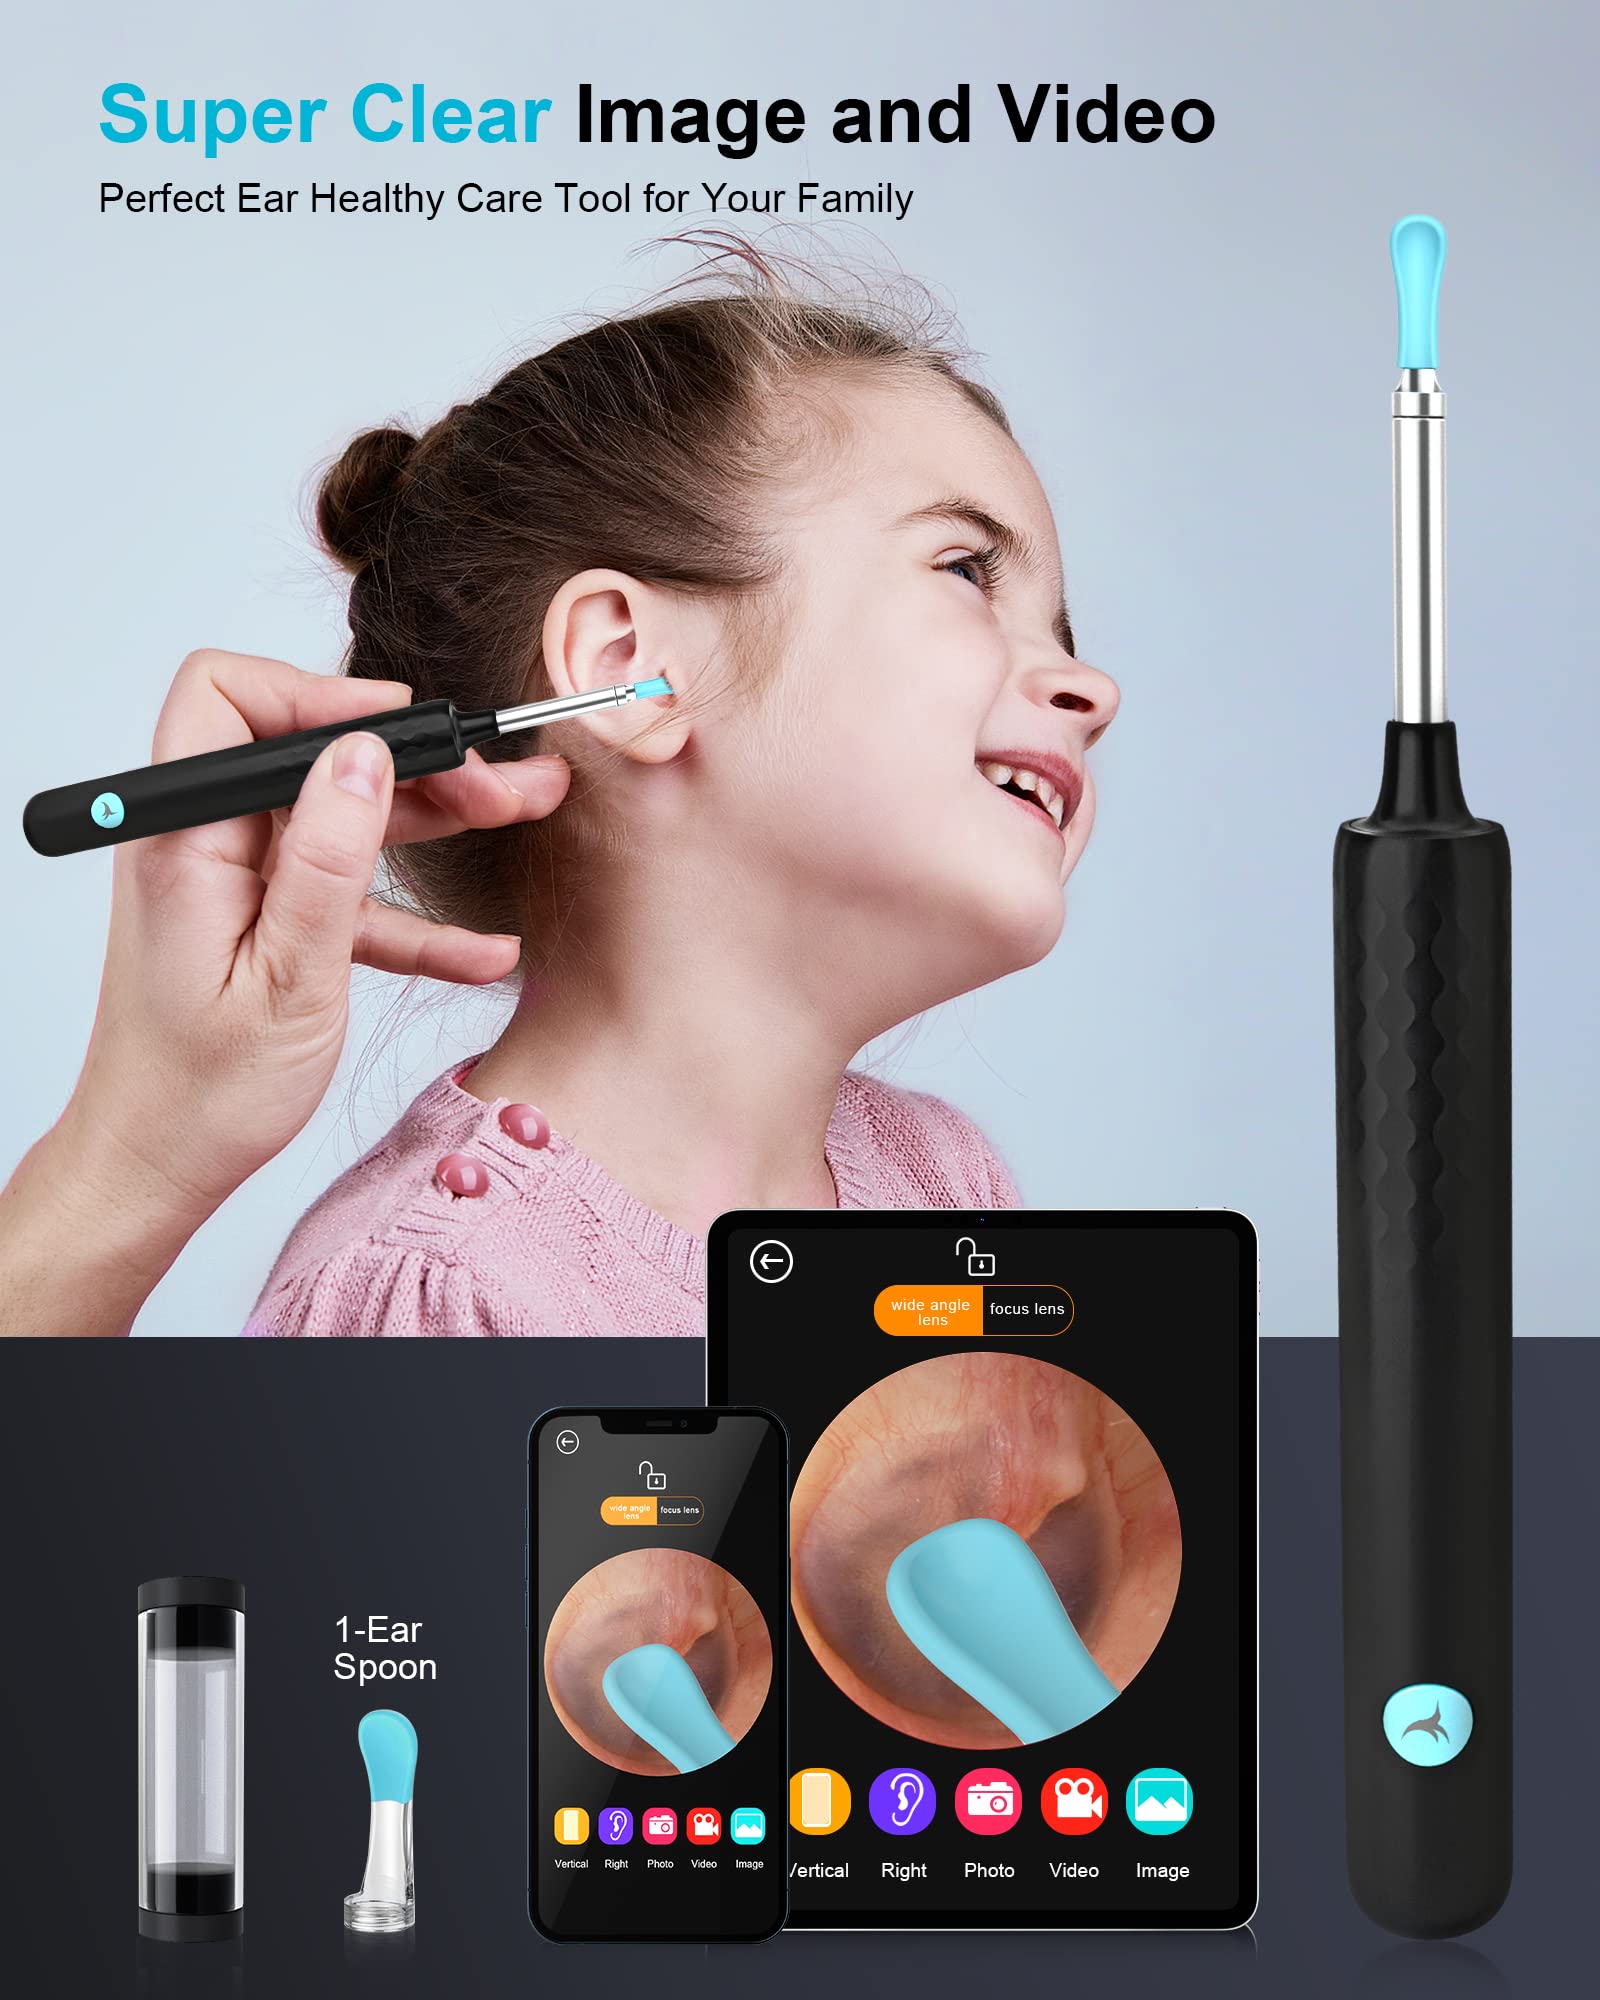 DJROLL Ear Wax Removal, Earwax Remover Tool, Ear Camera,1080P FHD Wireless Ear Otoscope with 6 LED Lights,Ear Scope with Ear Wax Cleaner Tool for iPhone, iPad & Android Smart Phones